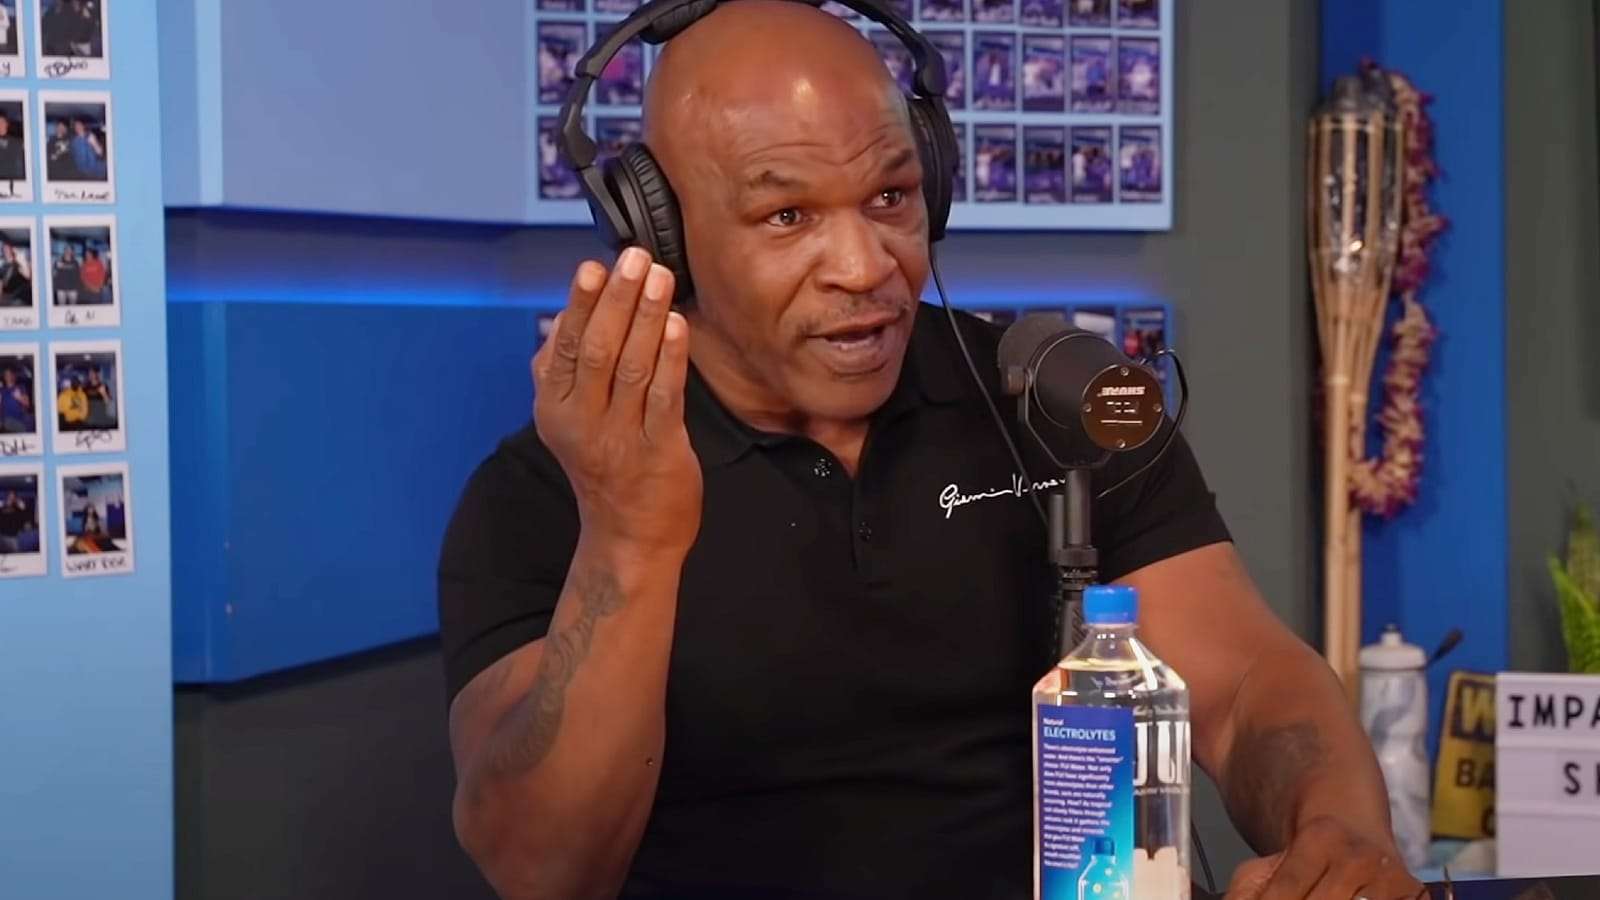 Mike Tyson boxing on Impaulsive